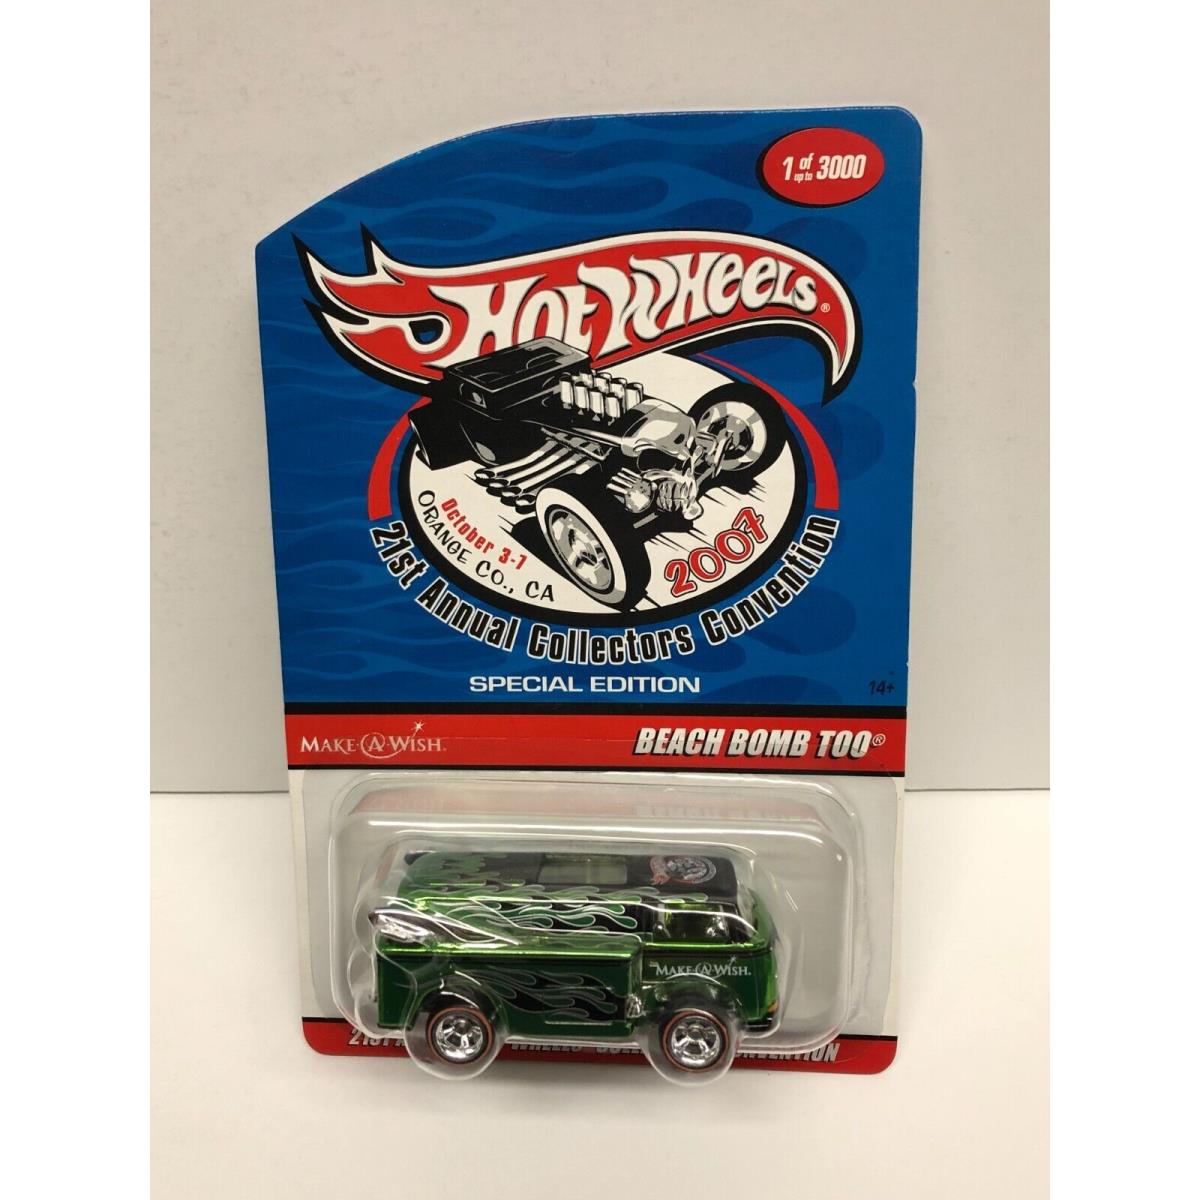 2007 Hot Wheels 21st Convention Green Beach Bomb Too 1 of 3000 Make A Wish